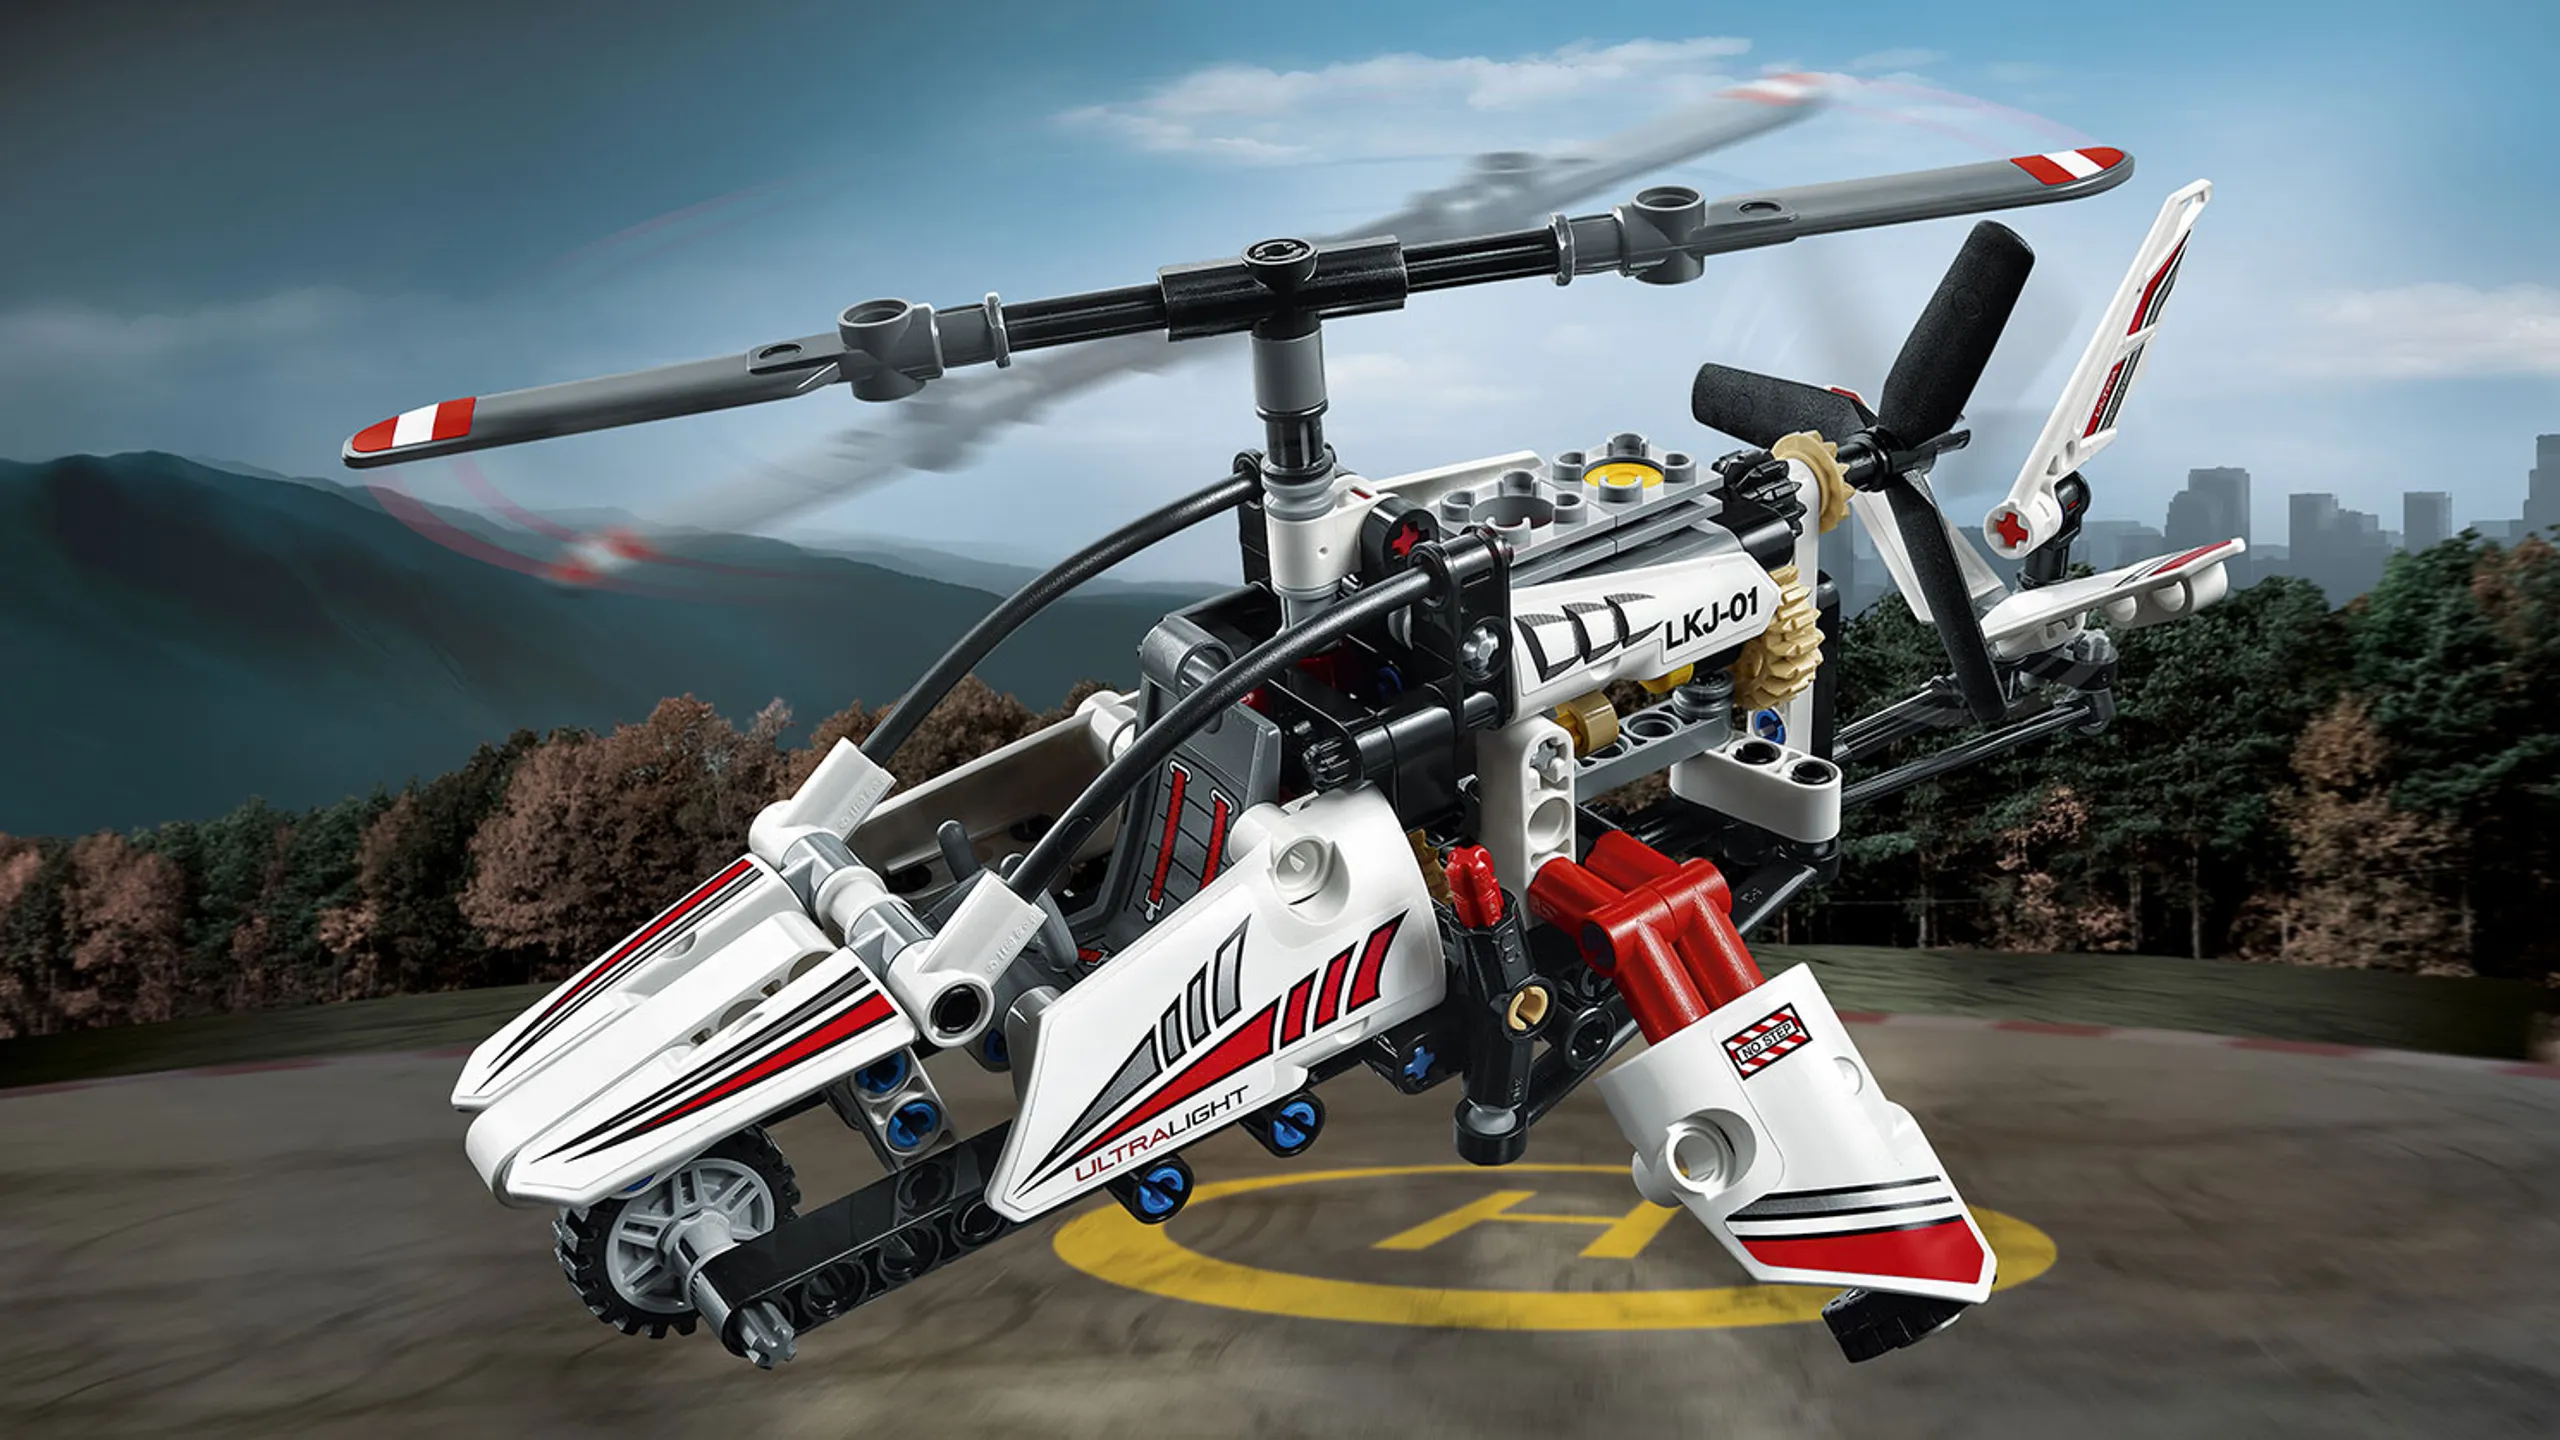 LEGO Technic - 42057 Ultralight Helicopter - Pilot this high-tech helicopter in white, blue and red colors! It has a tail rudder, main rotor, tail rotor and a detailed engine.